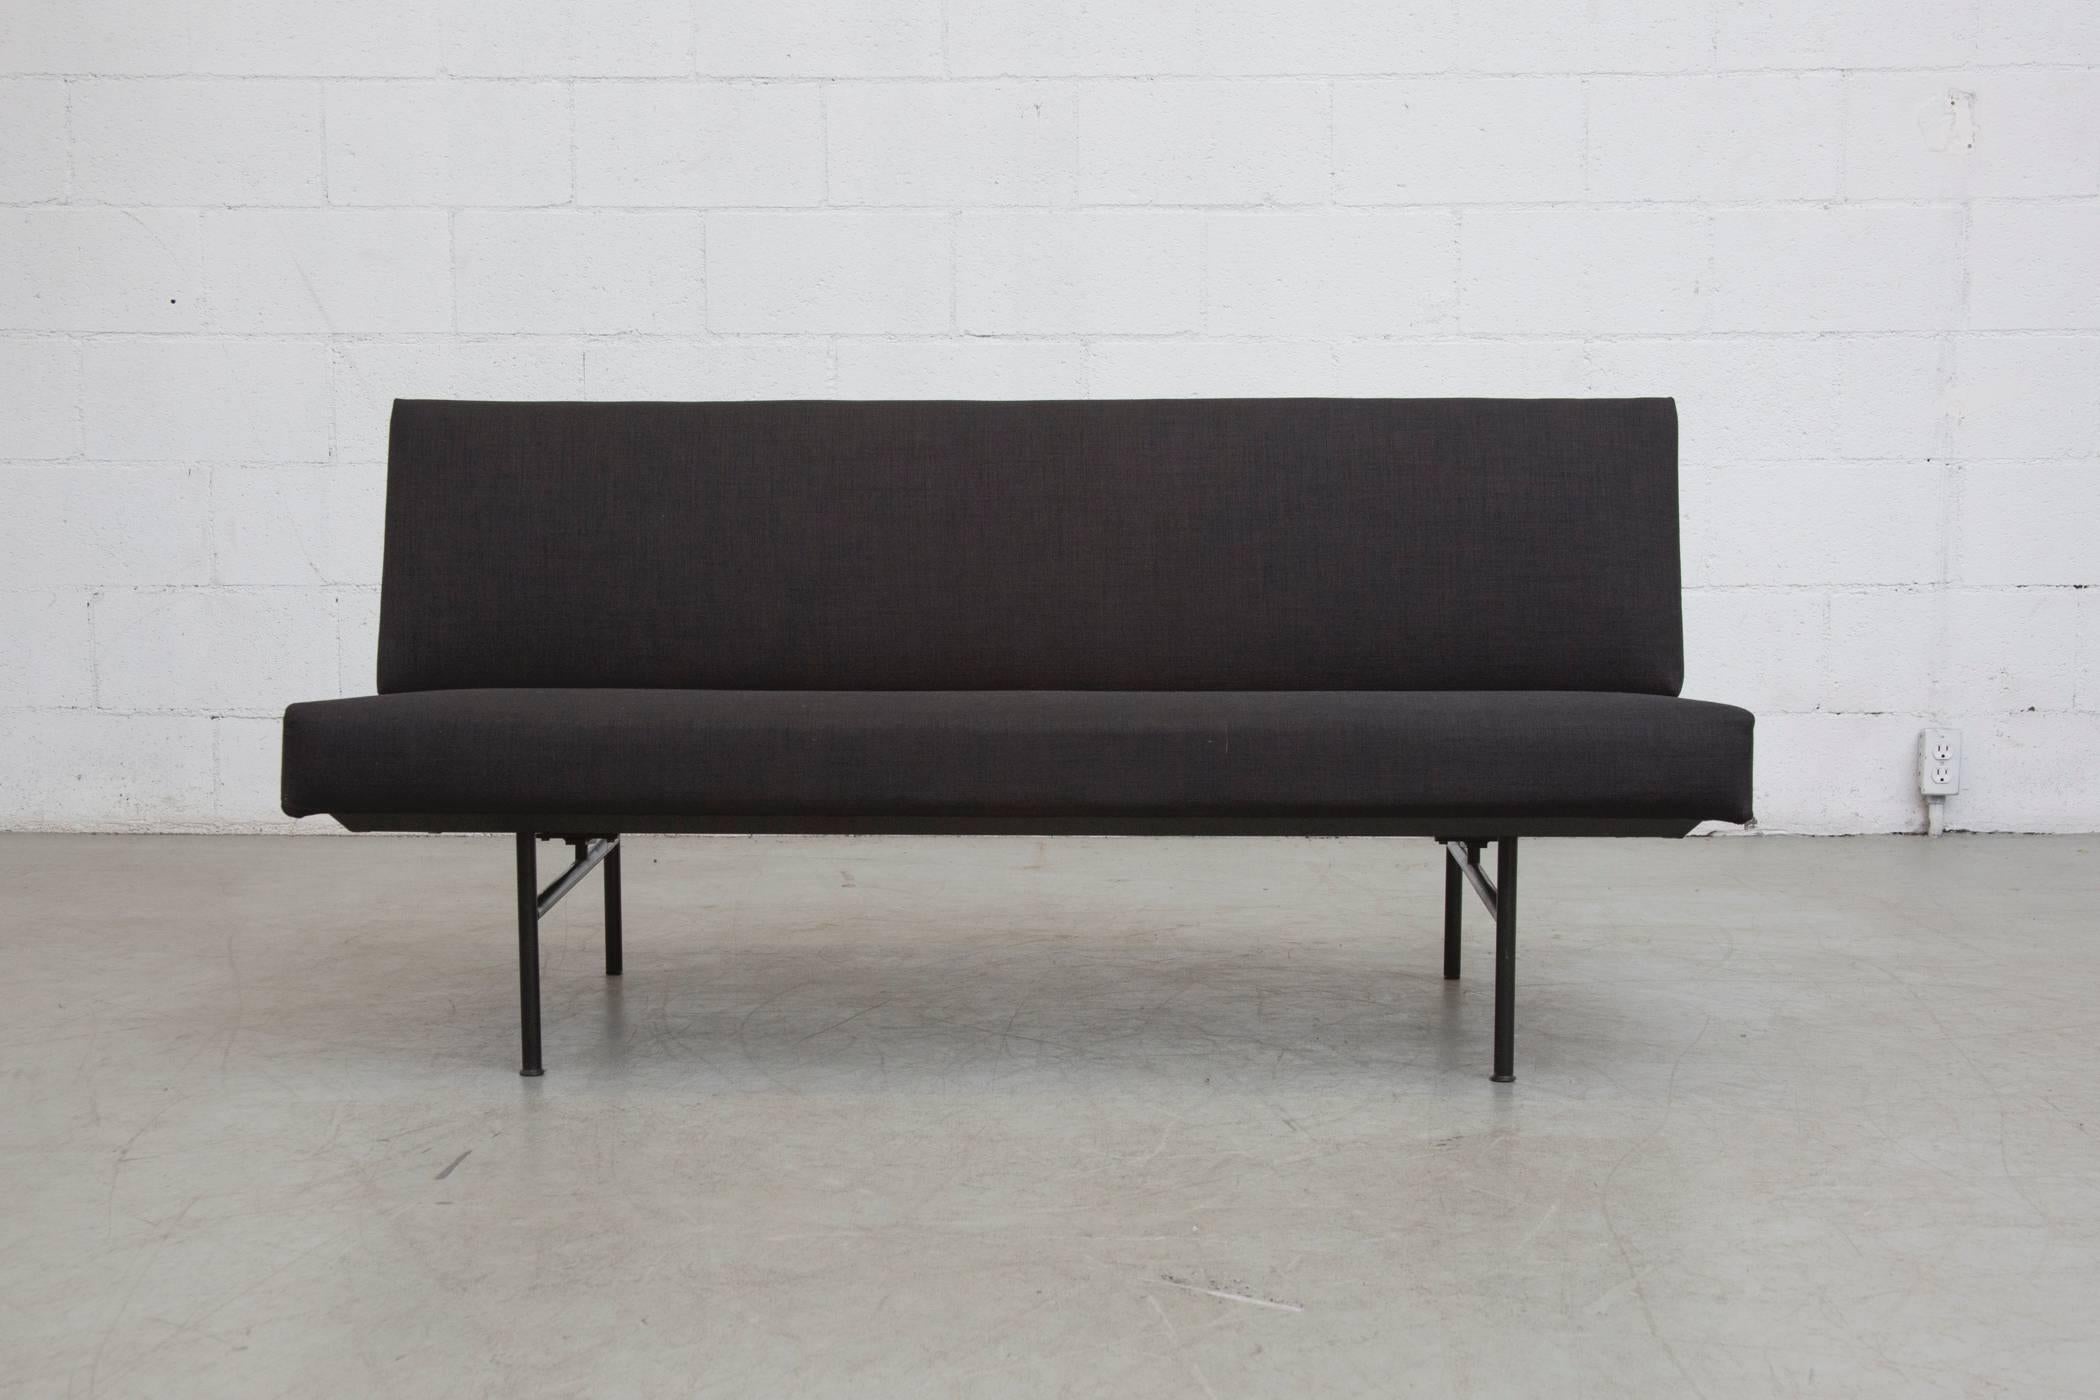 Black on black. Newly upholstered modern sofa attributed to Coen de Vries. Original black enemeled metal frame with some signs of wear, normal for its age and usage.